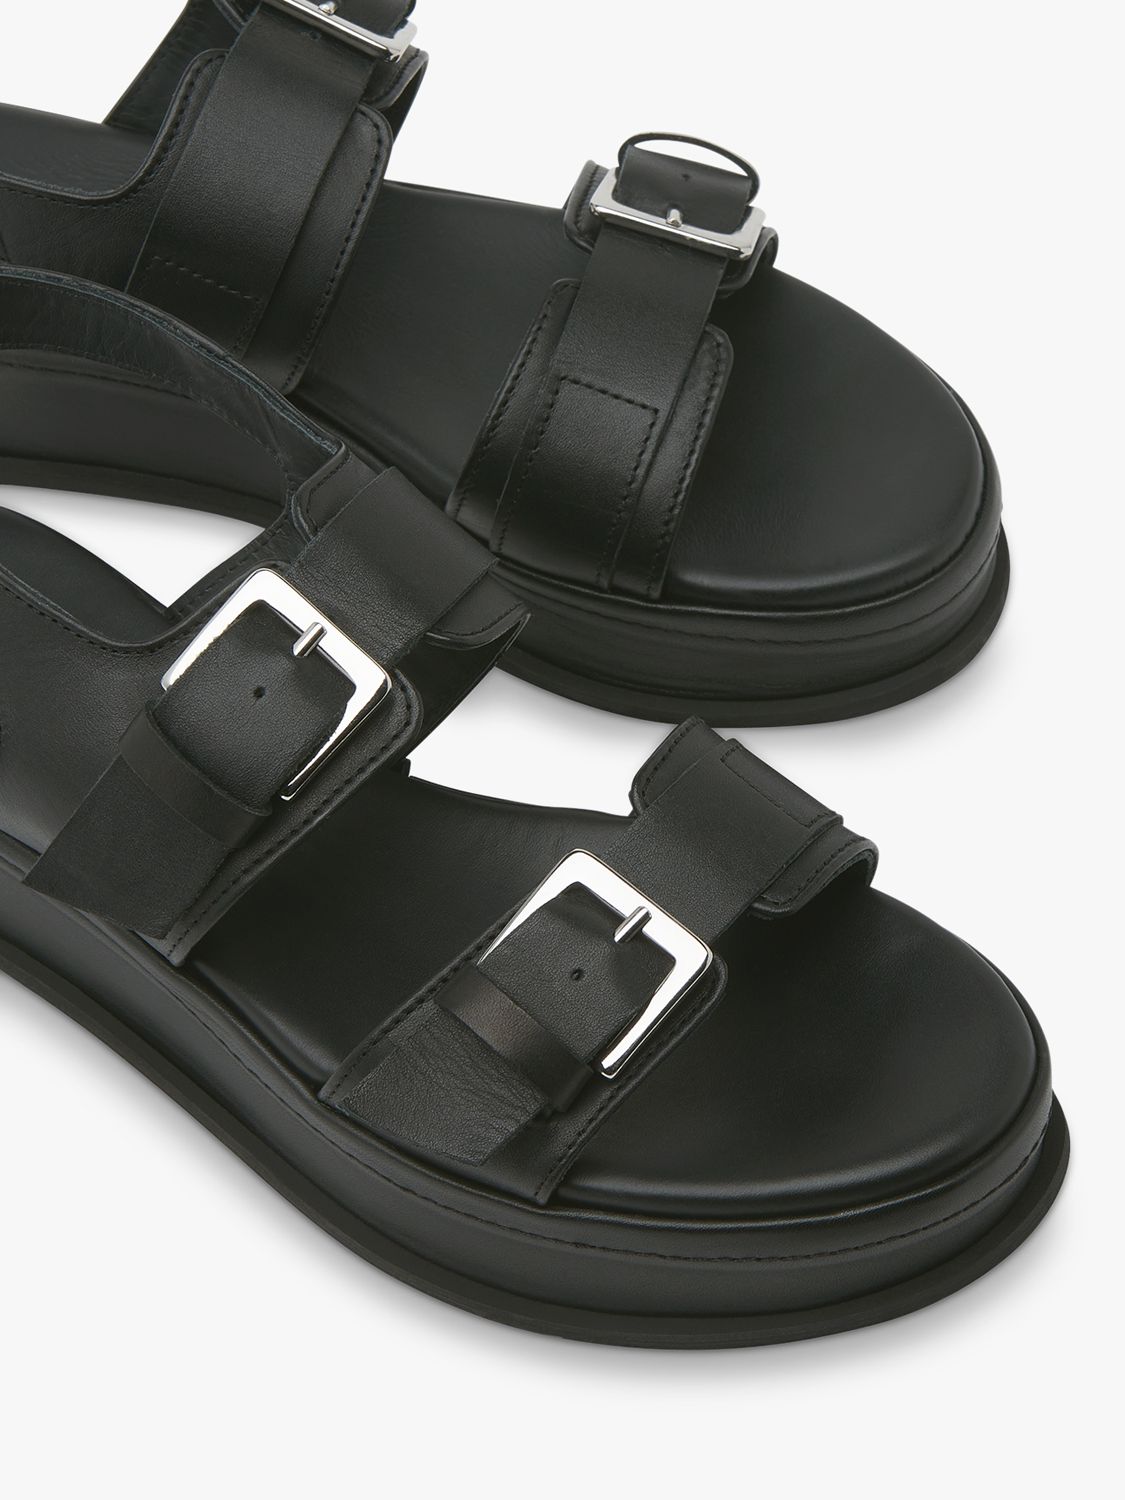 Whistles Marley Double Buckle Sandals, Black at John Lewis & Partners